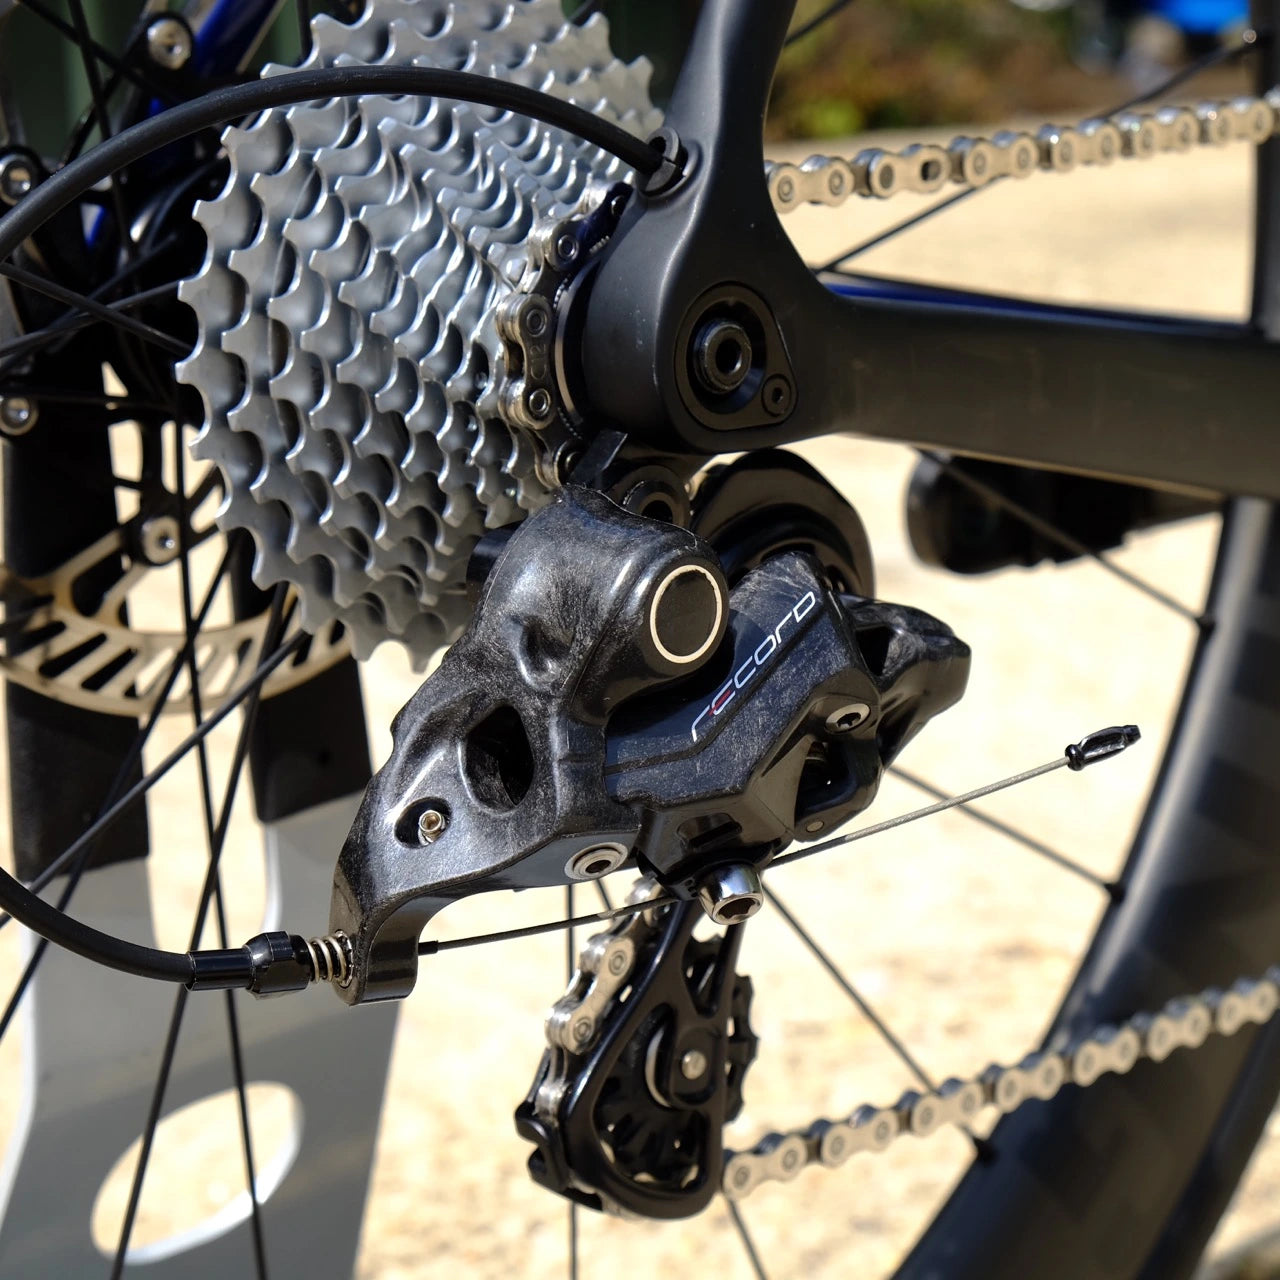 Handsling A1R0evo Campagnolo Record 12-Speed Disc